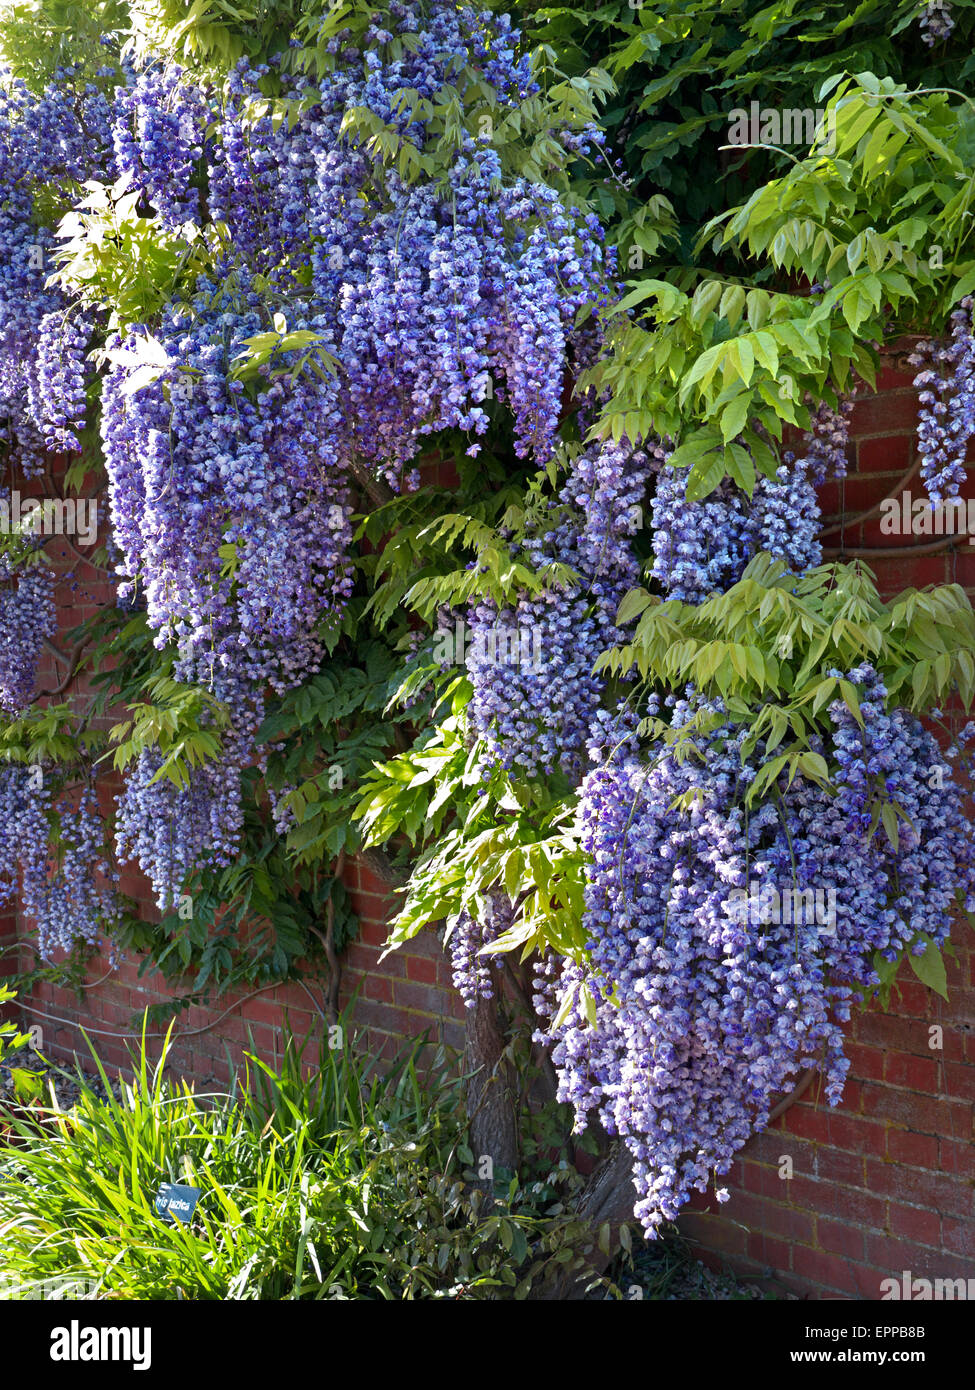 Profusion of Wisteria in full bloom, growing against a red brick wall in UK garden Stock Photo